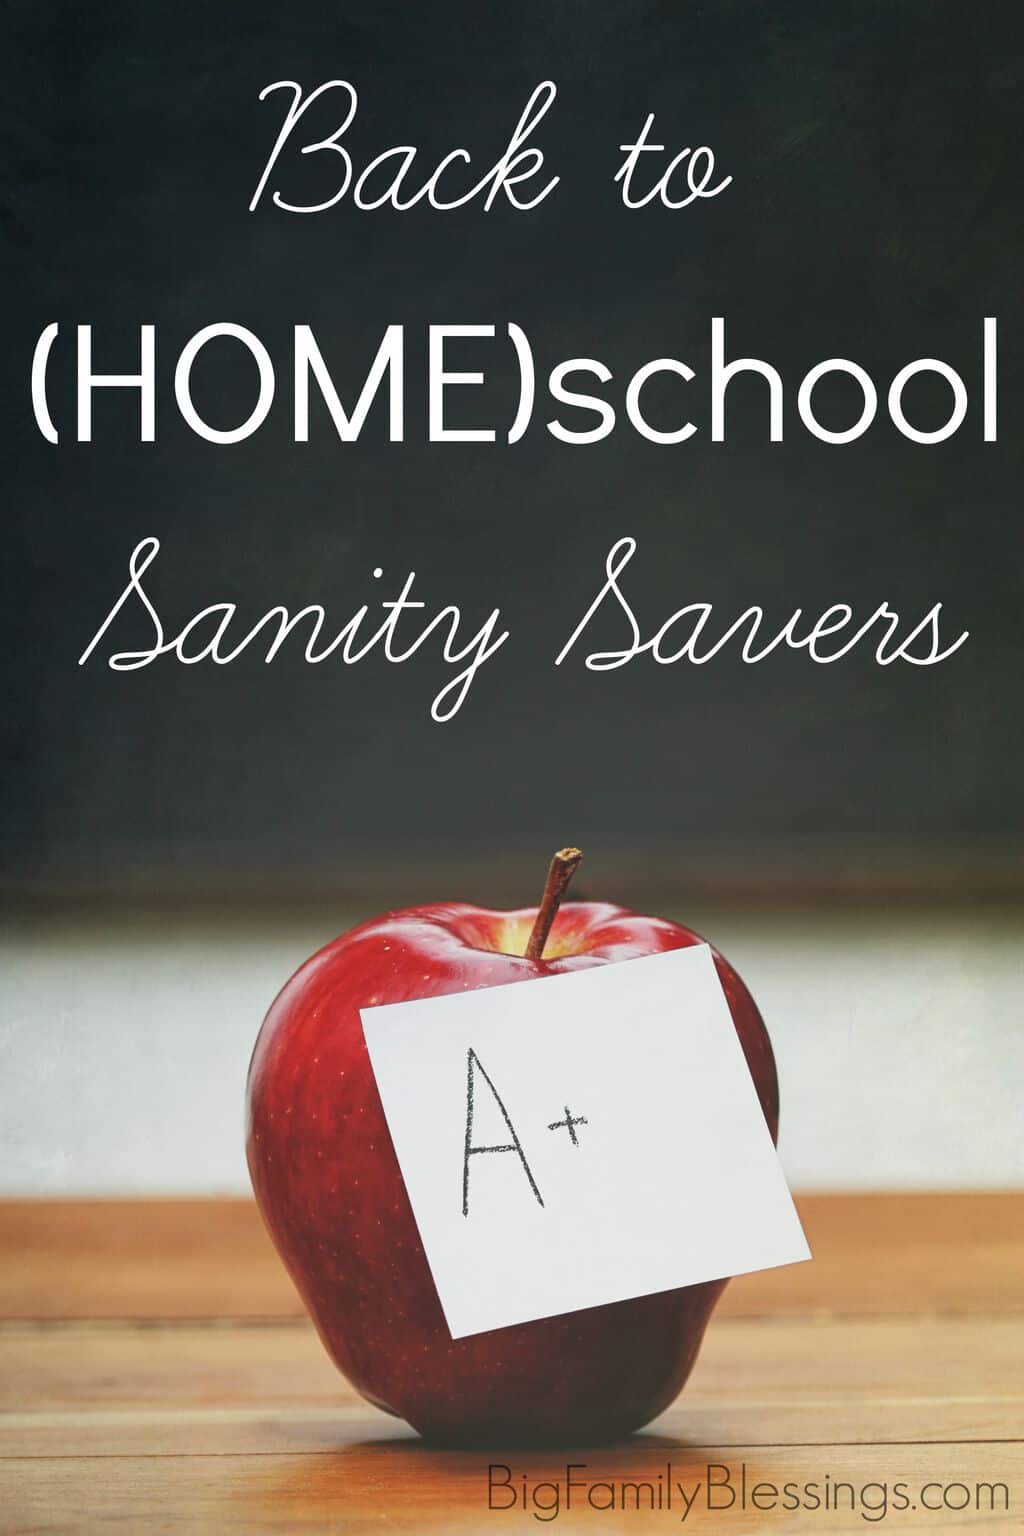 Tips for a smooth homeschool year from a homeschooling Mom of 6! Save your sanity, and keep your school and home running smooth without stress or frustration this school year.